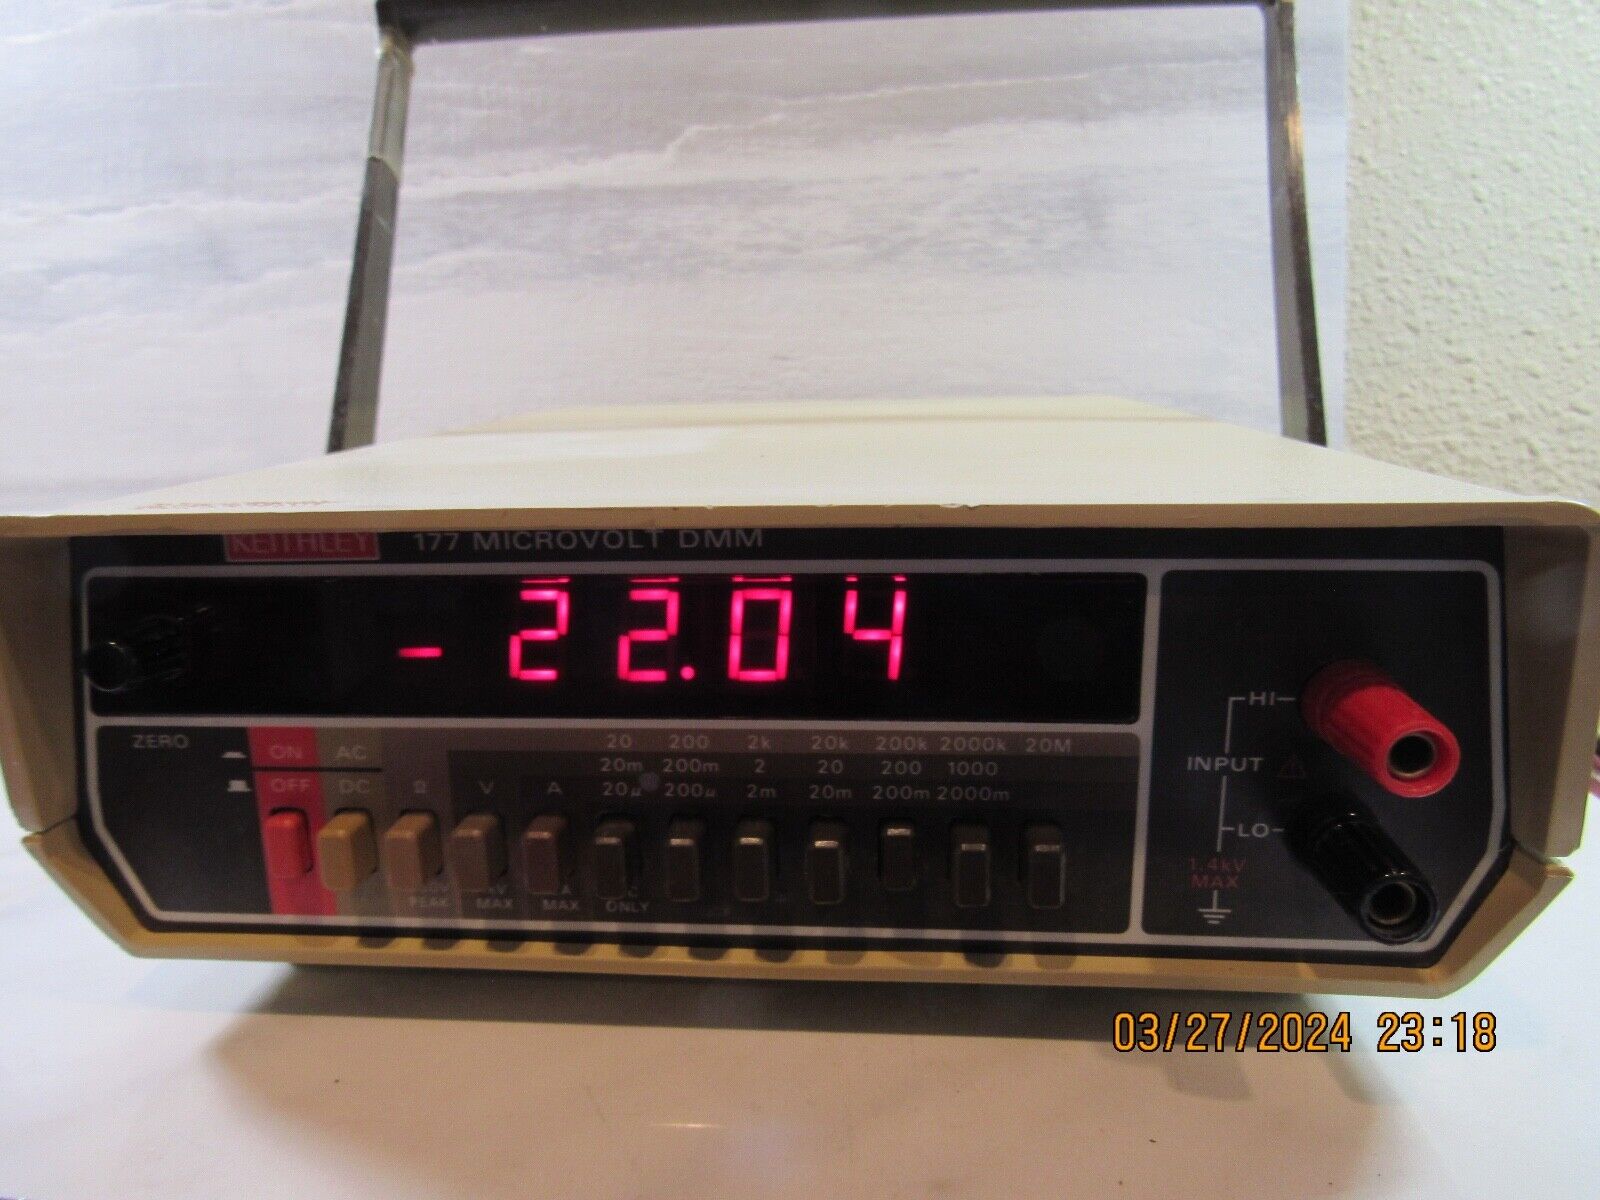 Vintage Keithley 177 Microvolt DMM Bench Multimeter For Repair